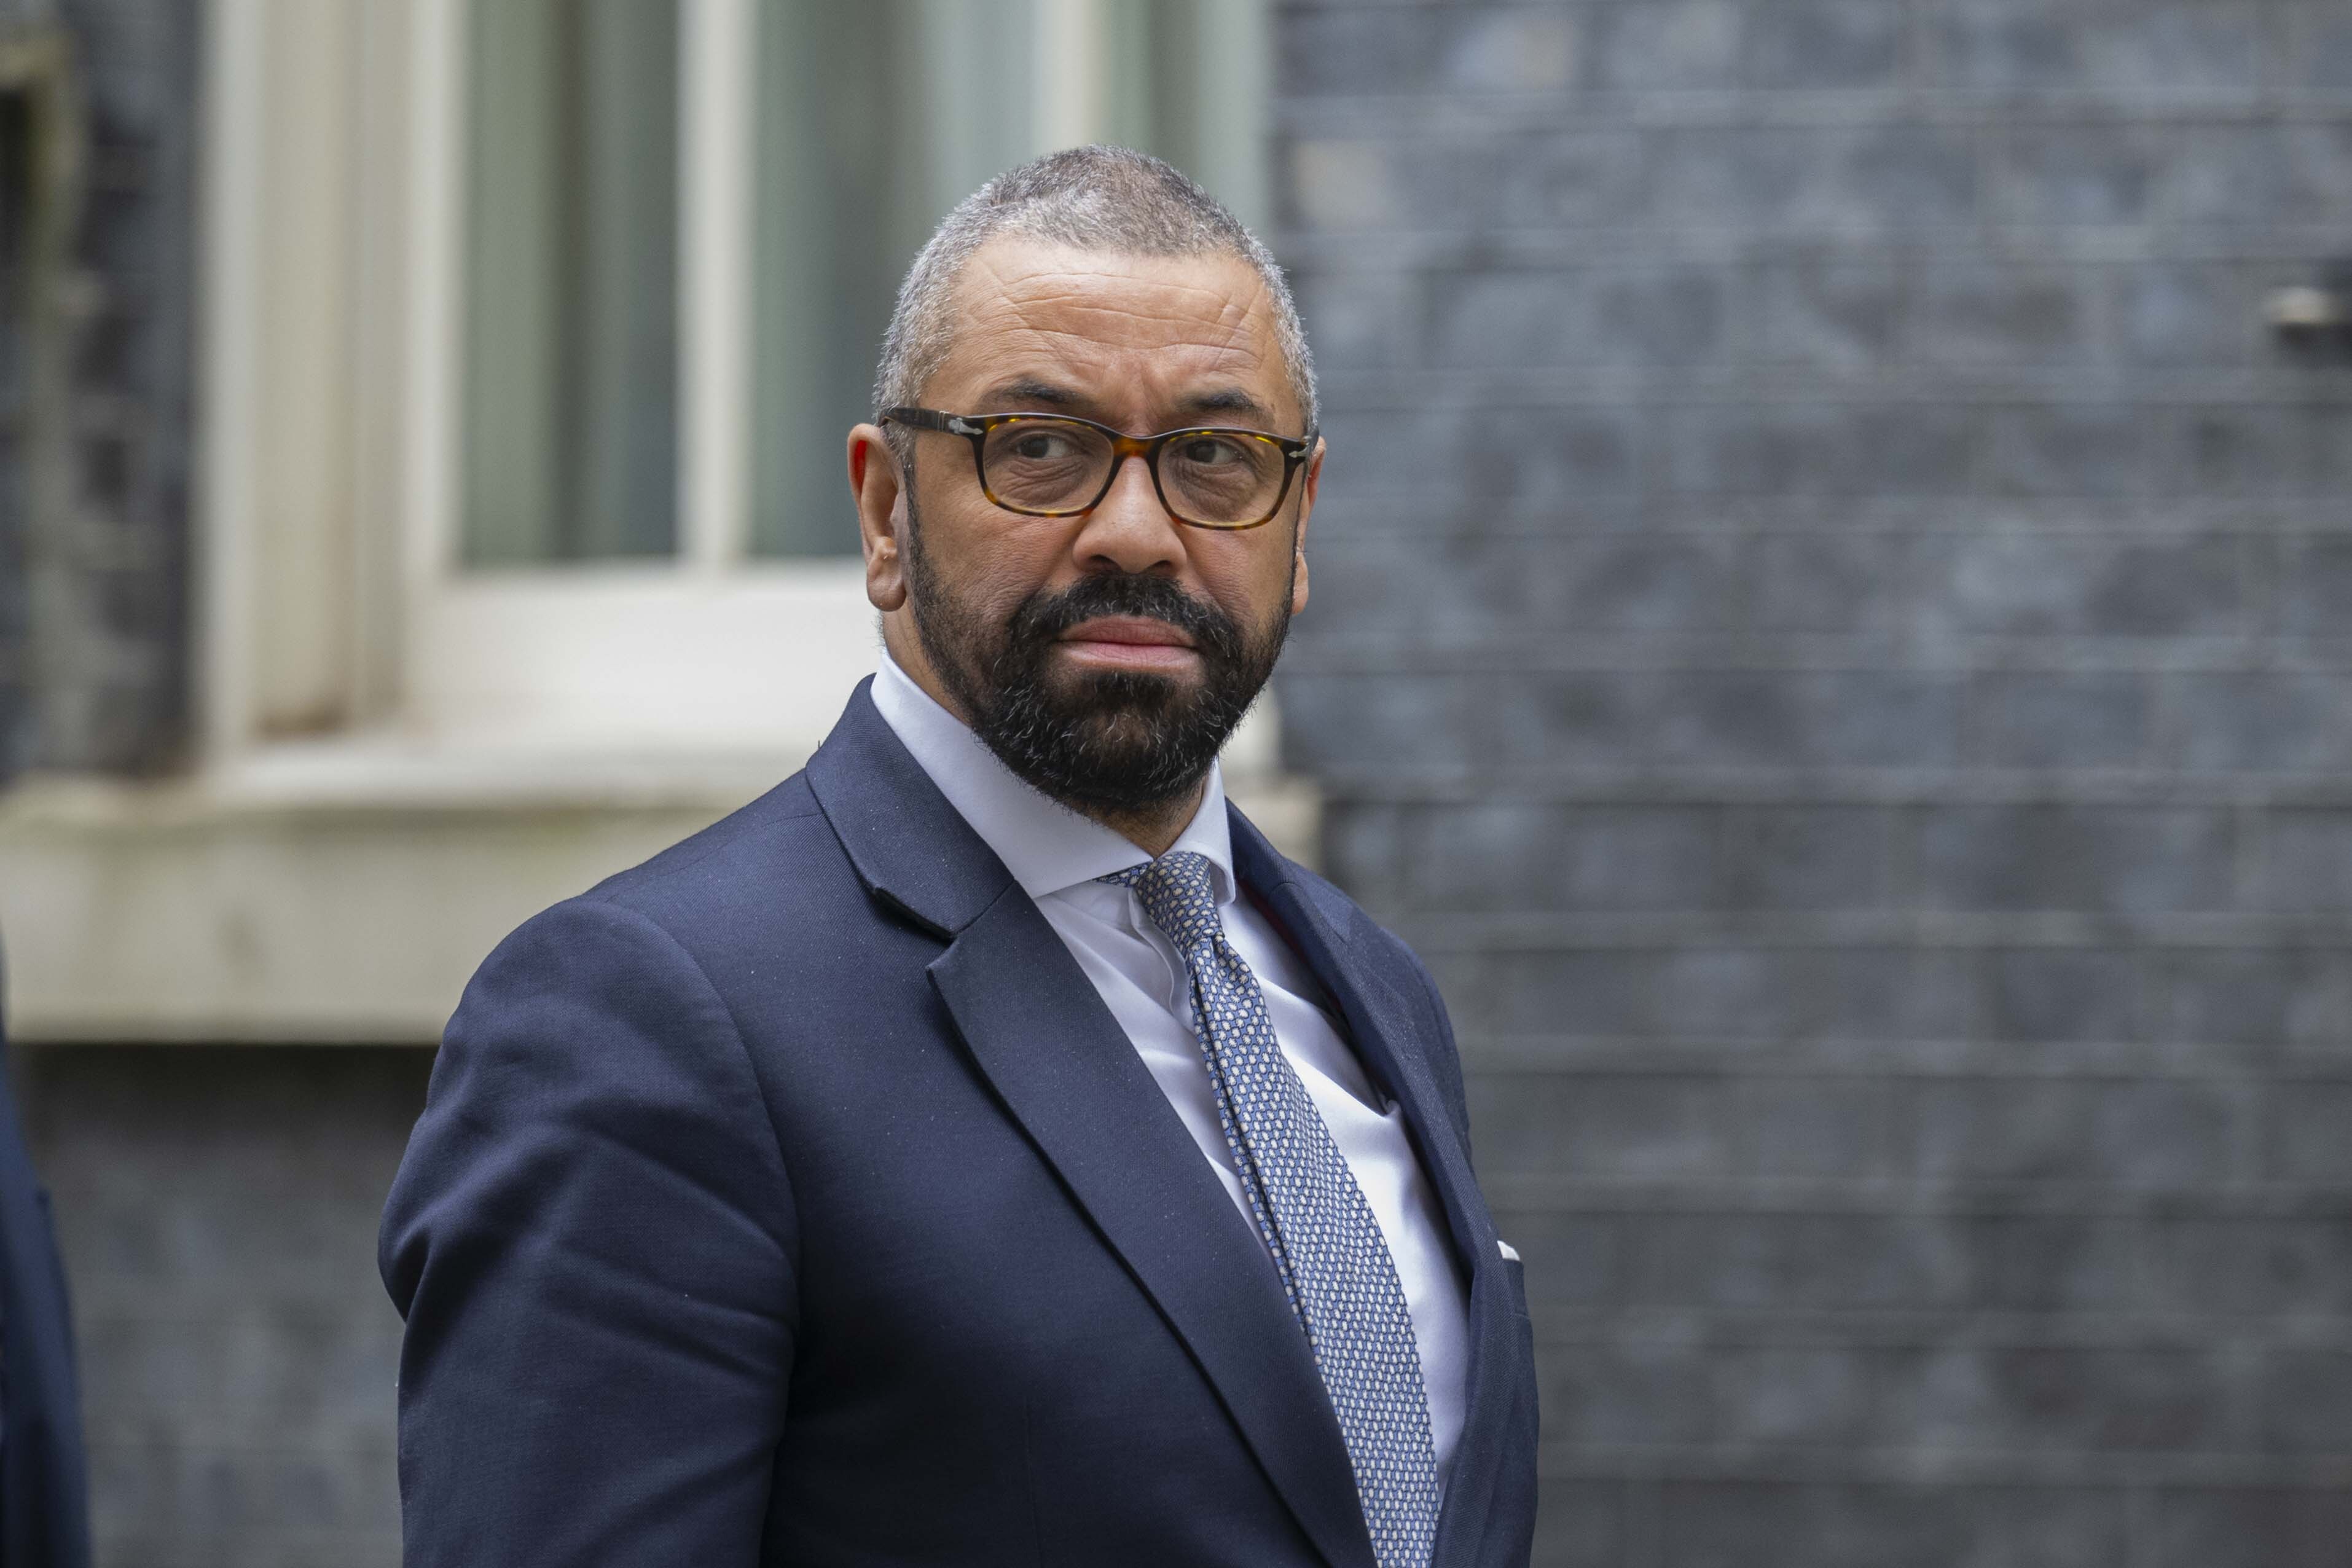 James Cleverly has warned Peers to stop the 'sabotaging' the Rwanda deportation scheme